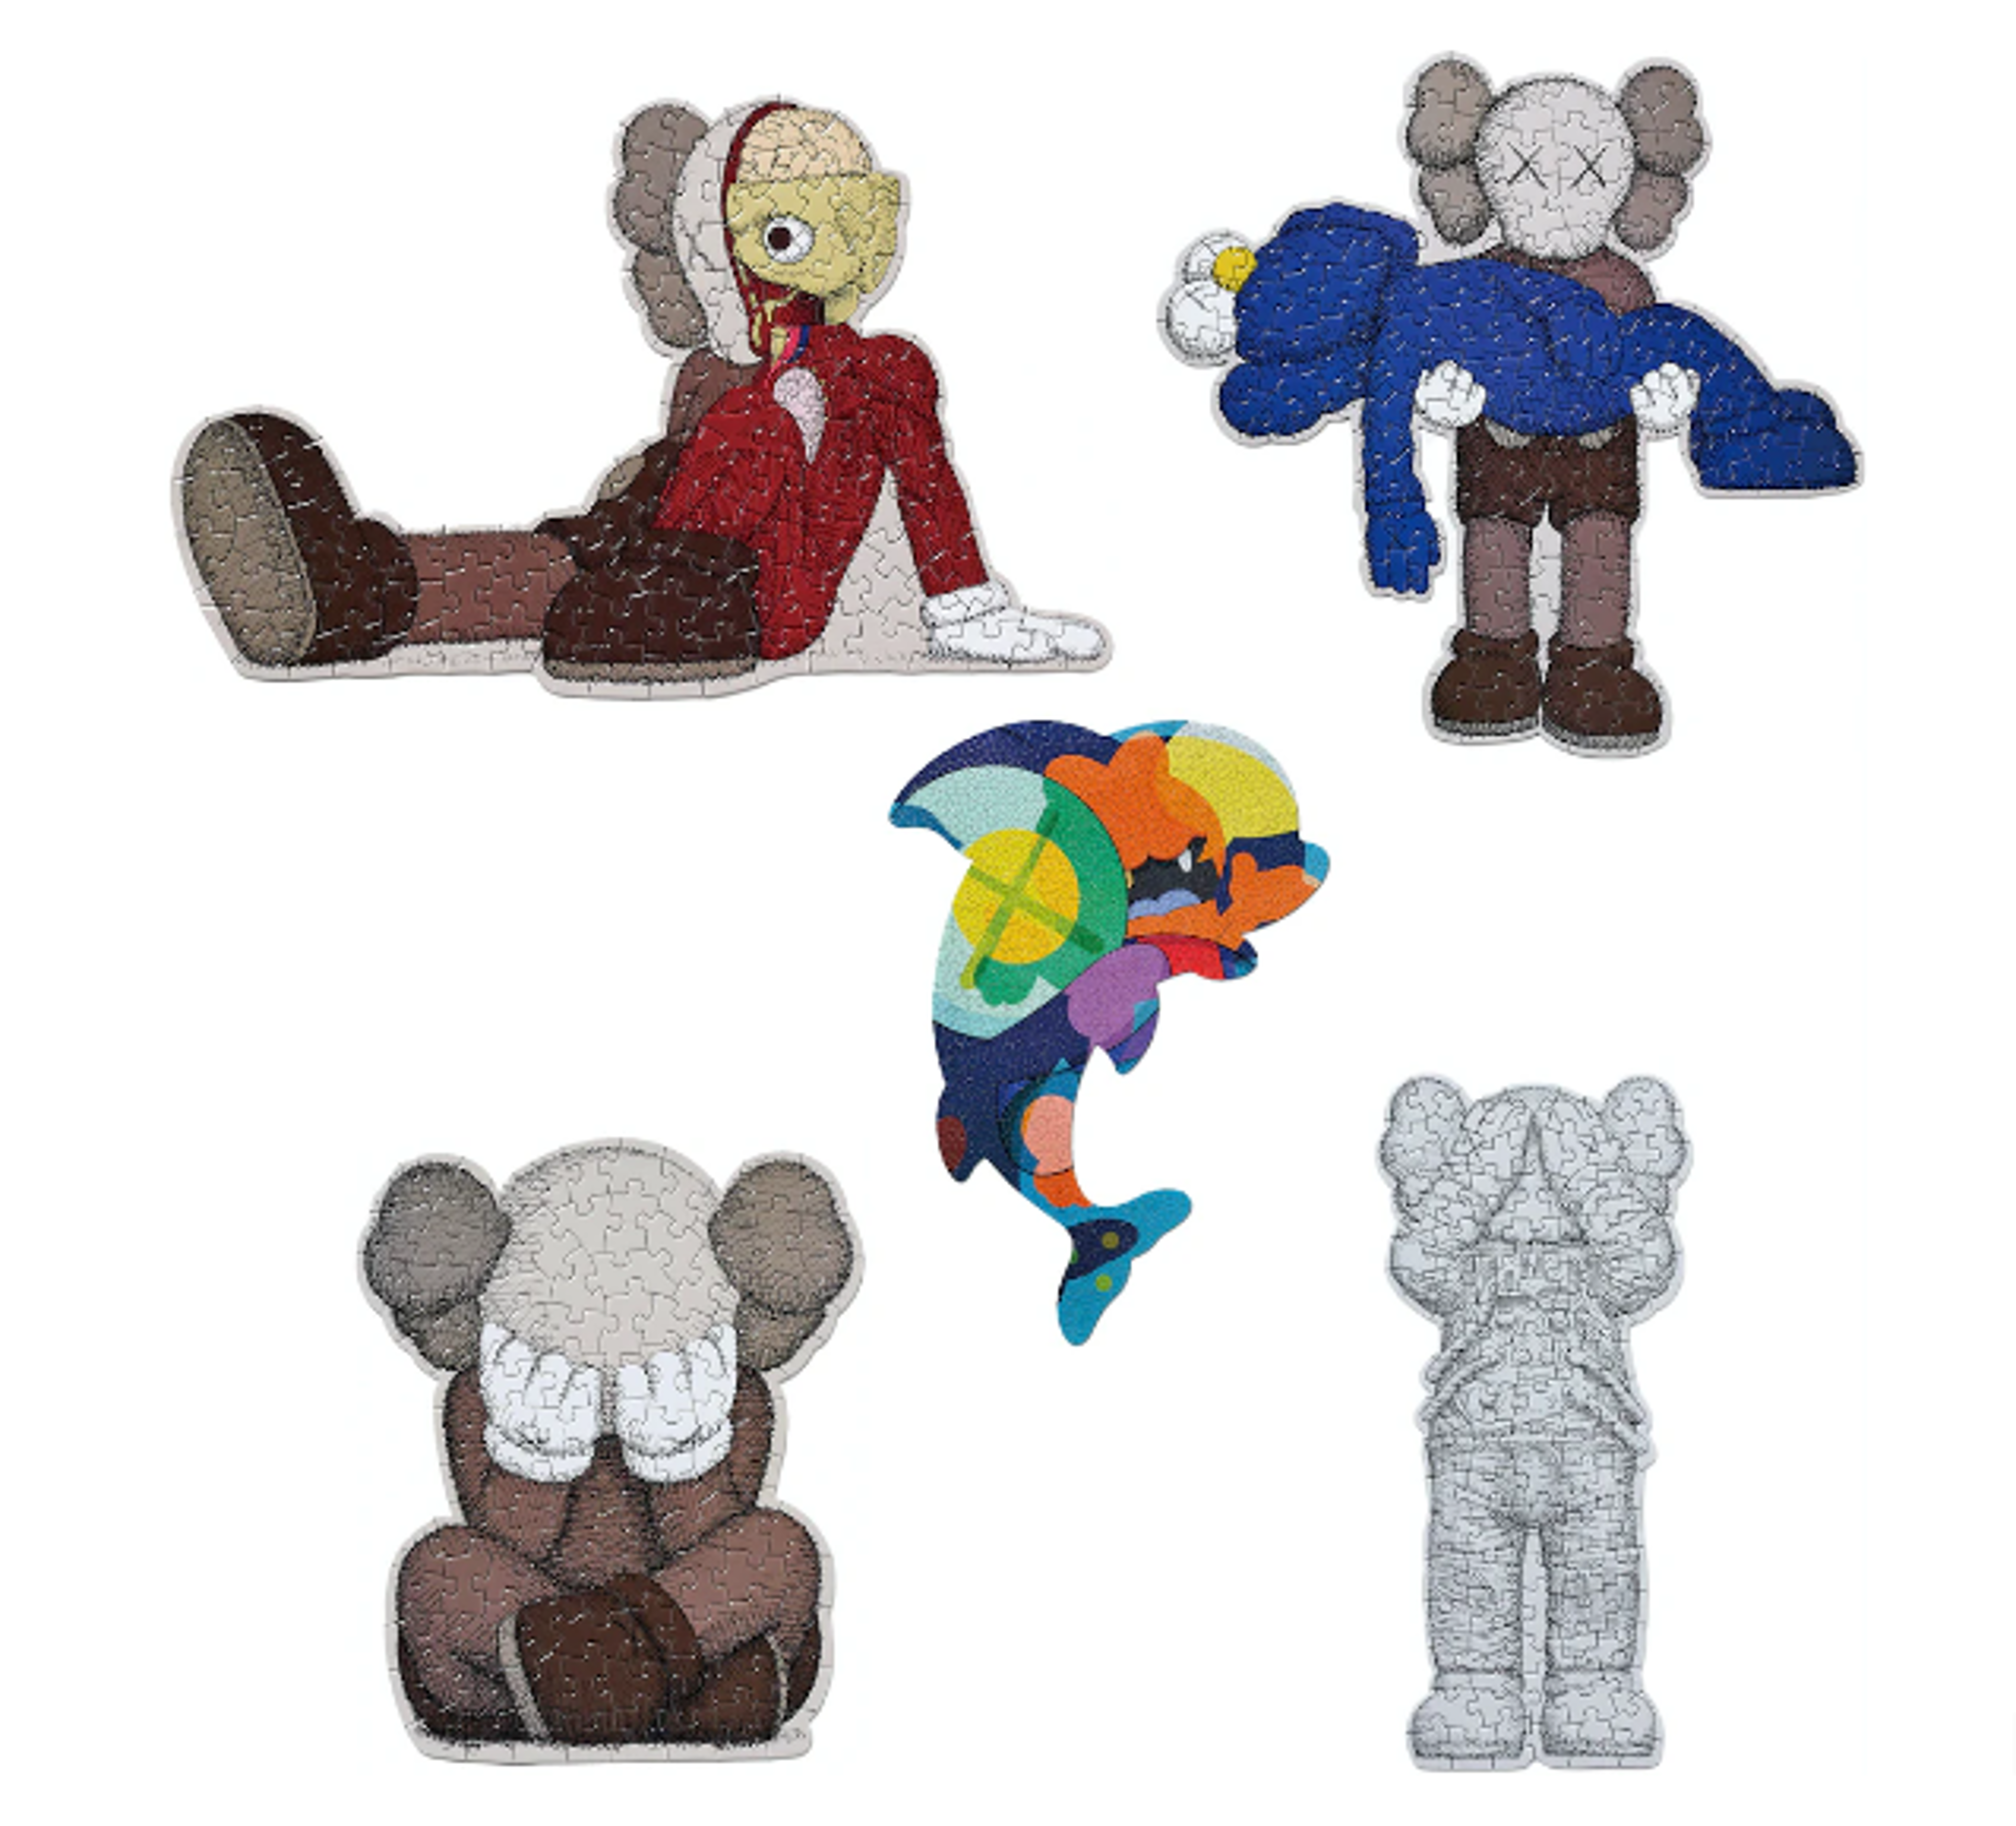 KAWS TTokyo First exhibition Jigsaw Puzzles set of 5